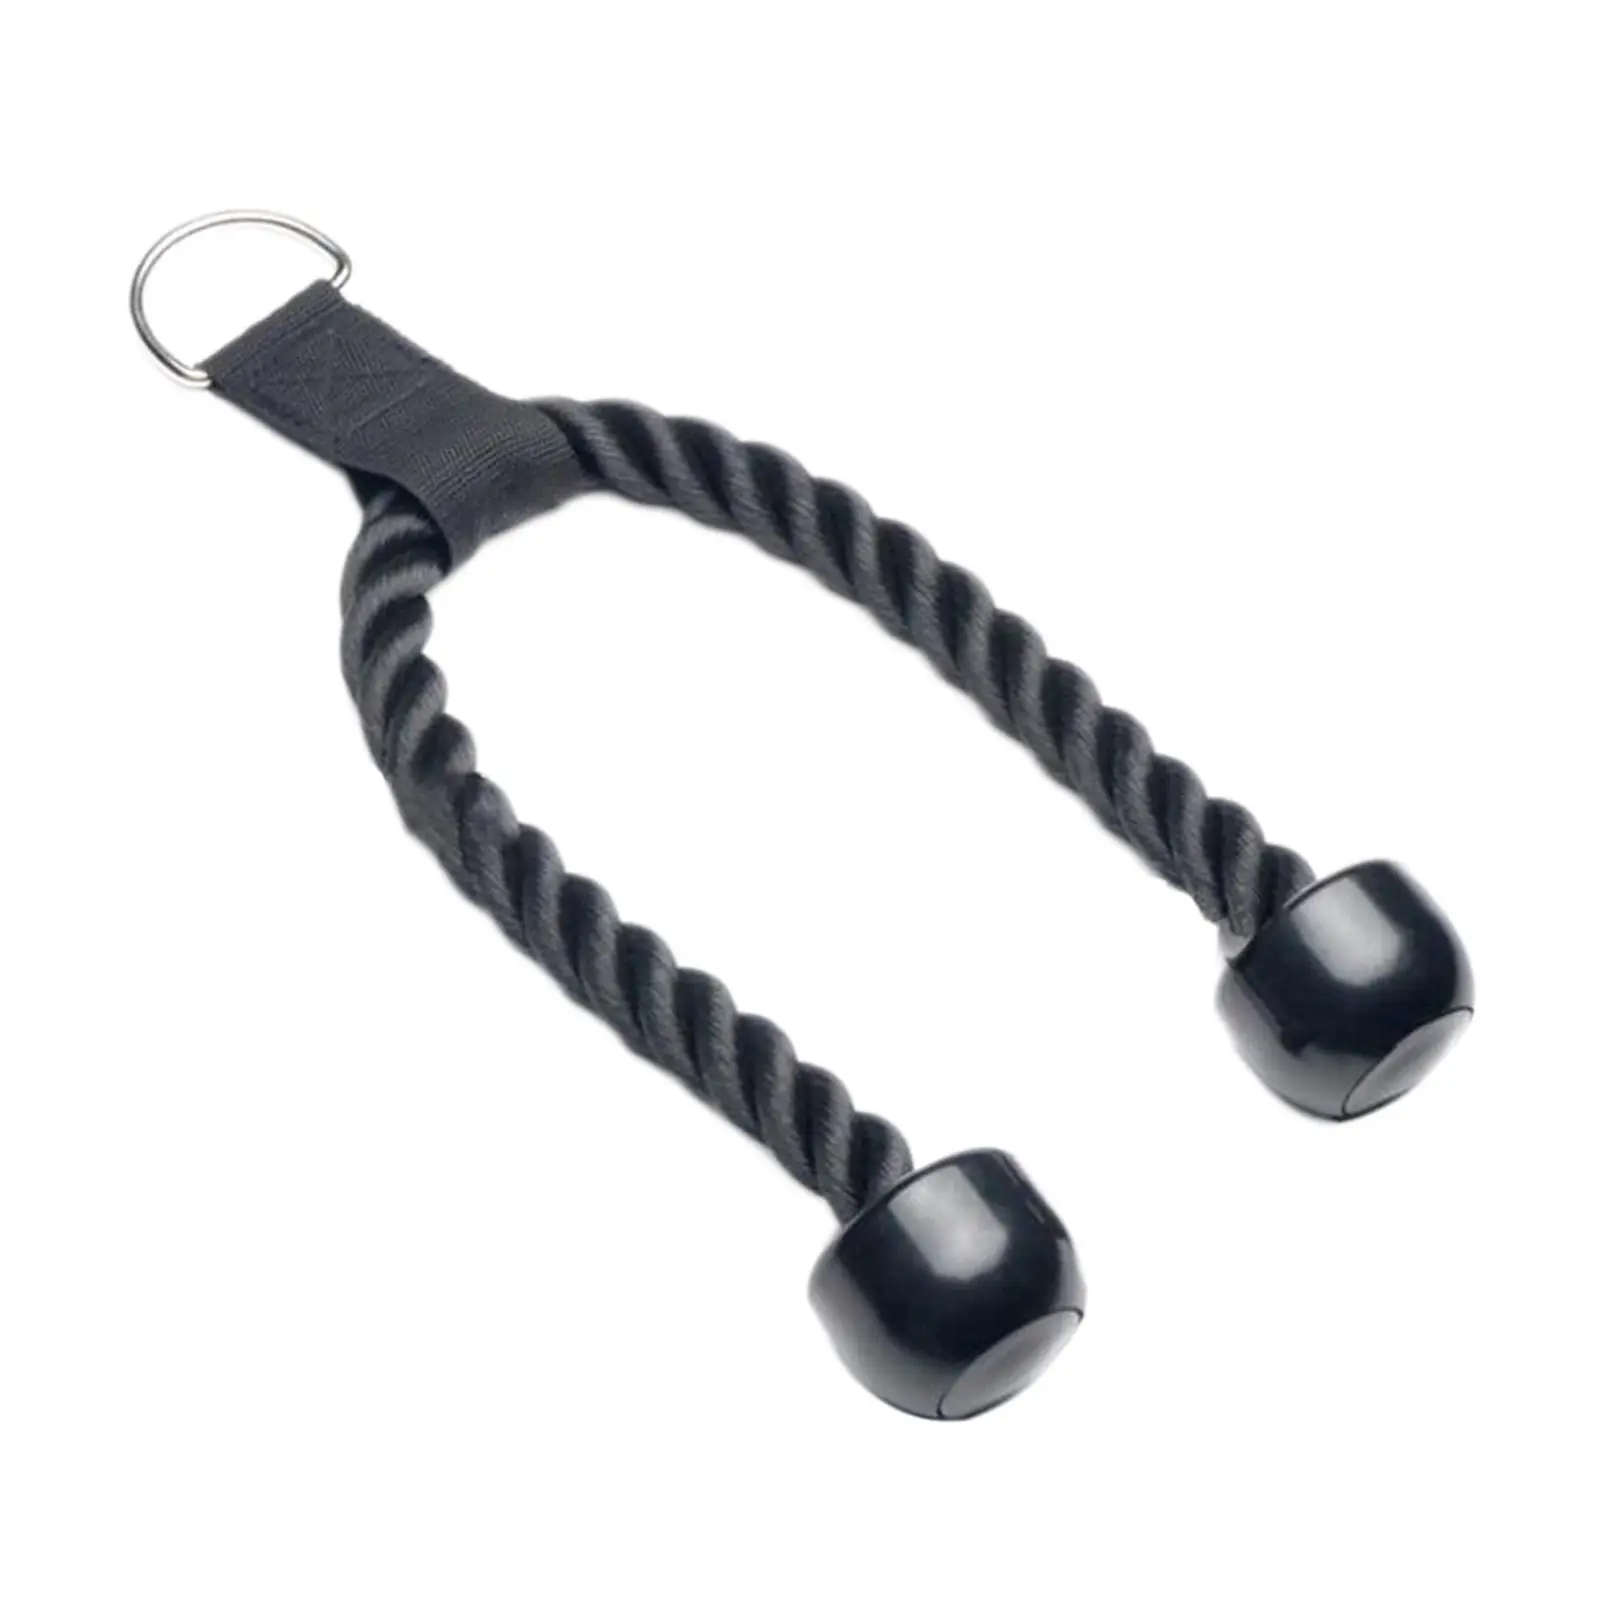 70cm Tricep Rope Accessories Pull Down Attachment Fitness Shoulder Muscle